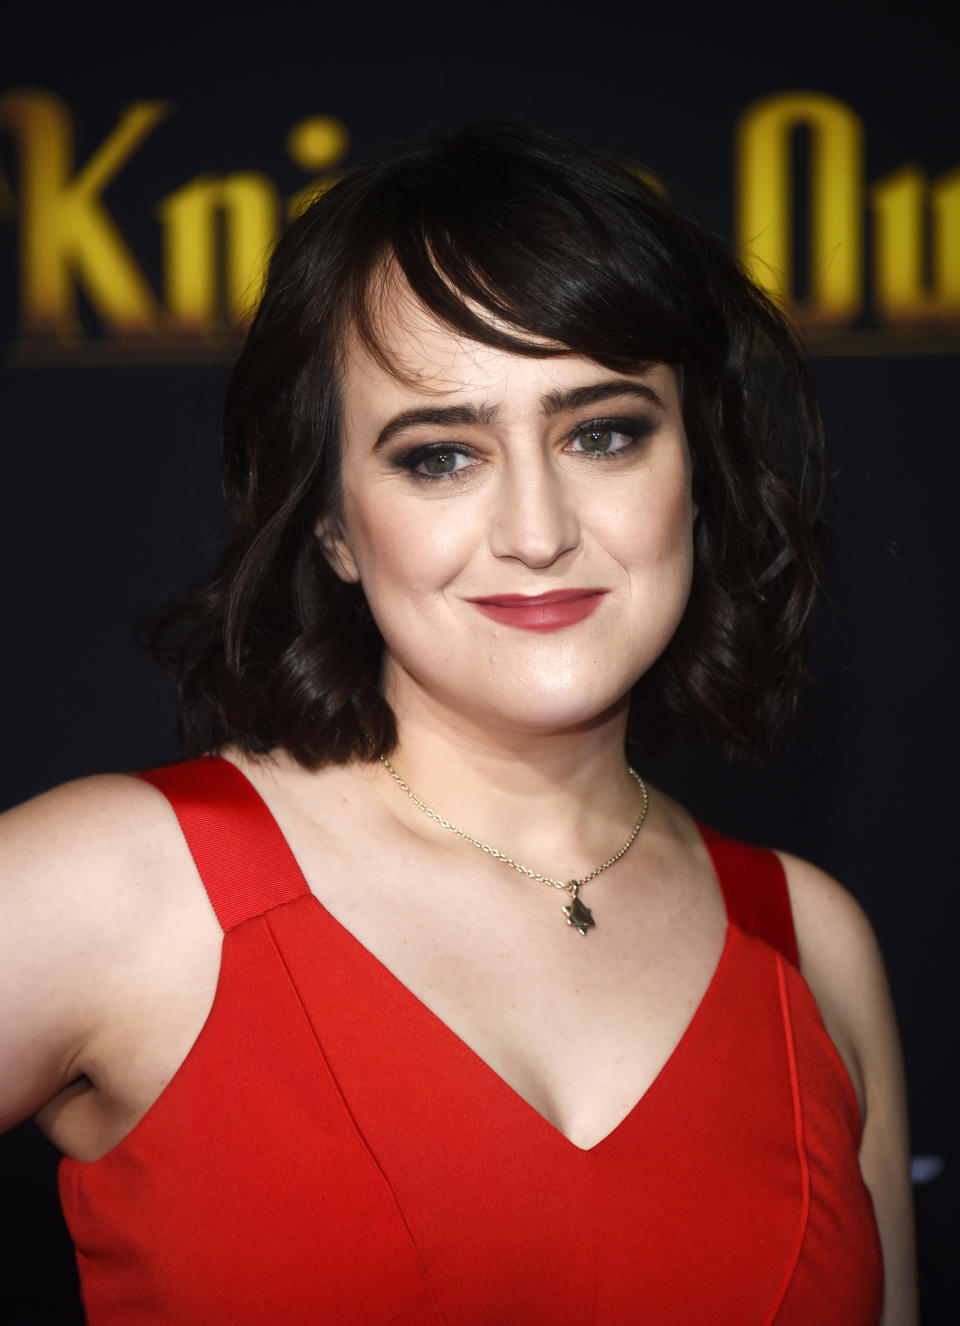 Mara Wilson arrives at the premiere of Lionsgate's "Knives Out" at the Regency Village Theatre on November 14, 2019 in Westwood, California